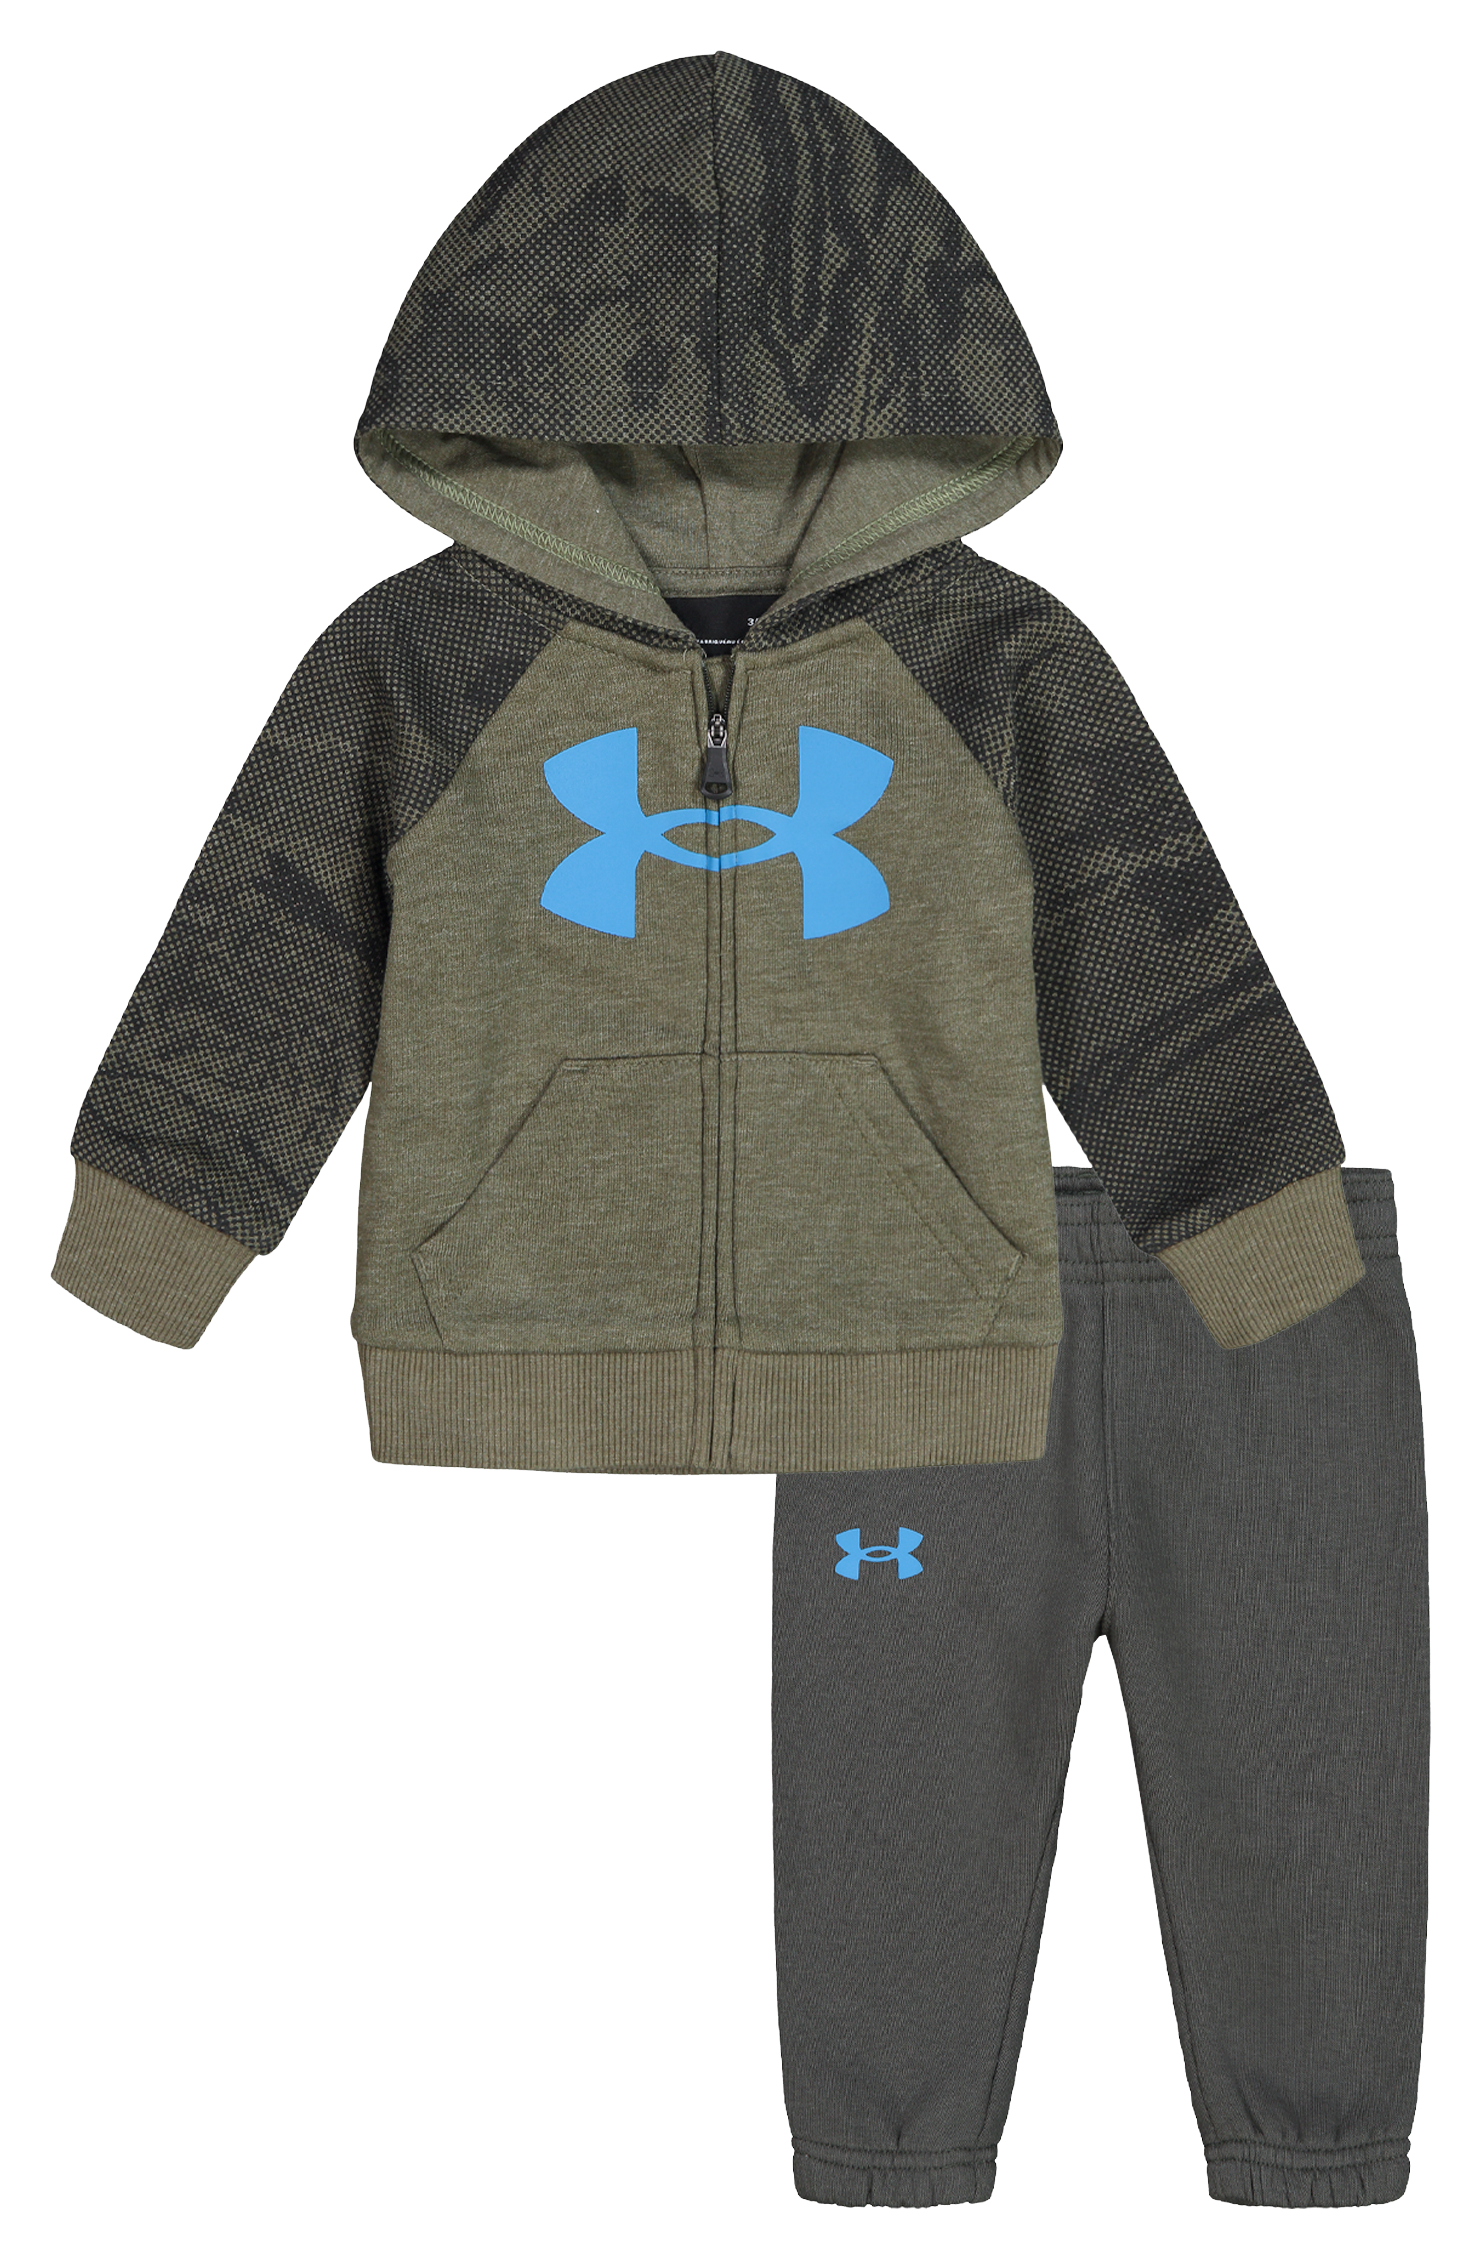 Under Amour Half Tone Reaper Colorblock Long Sleeve Hoodie and Jogger Set for Babies Marine OD Green 6 9 Months